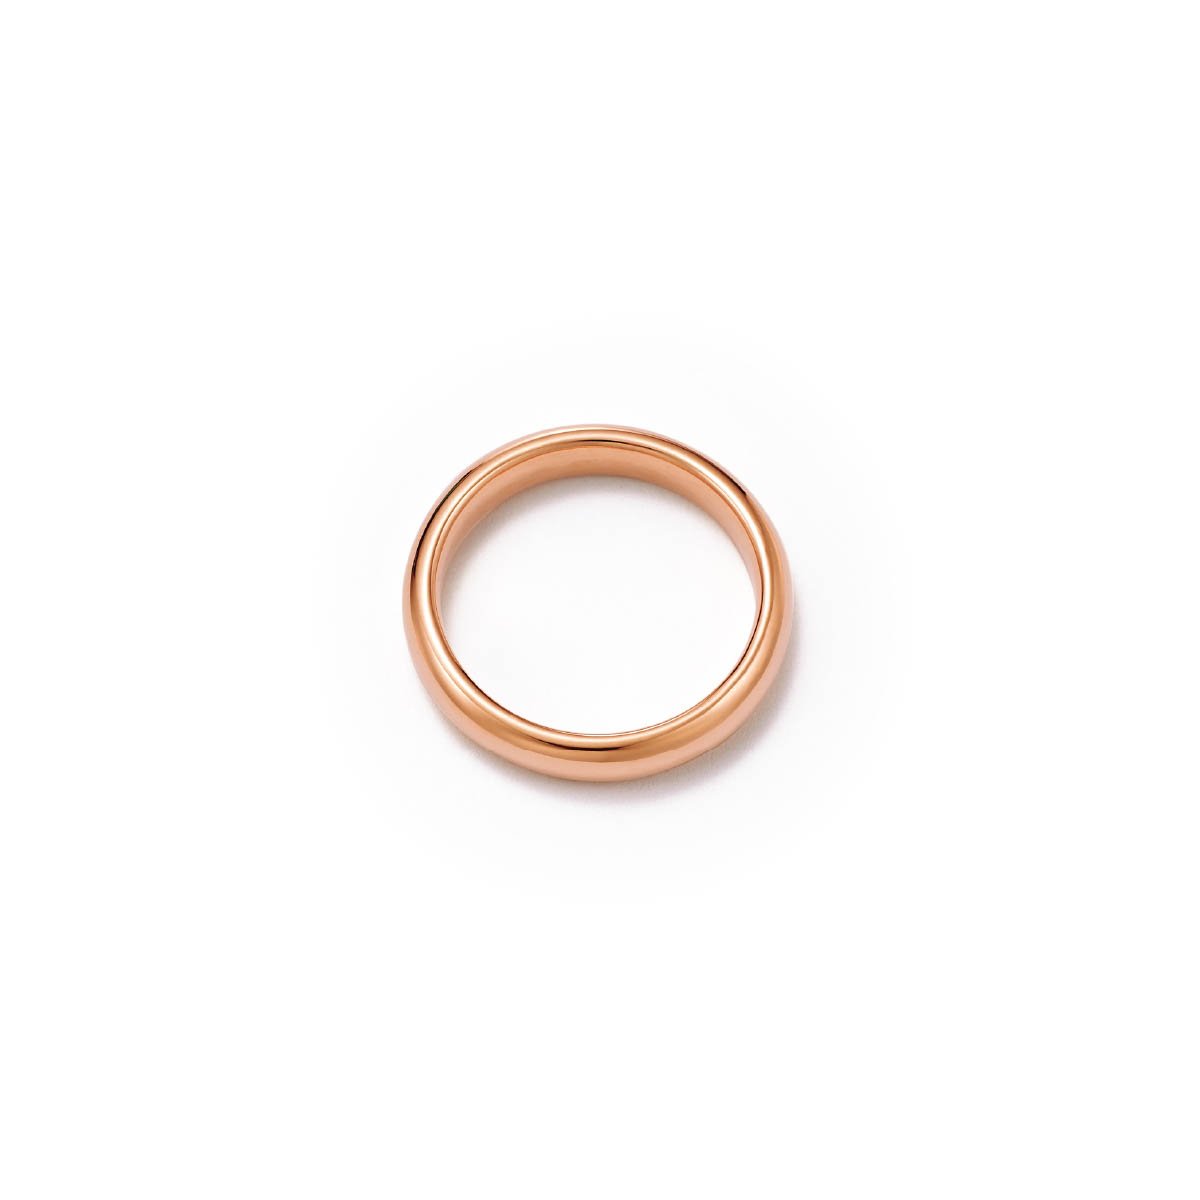 Sincerity Classic 18kt Certified Fairmined Ecological Rose Gold Wedding Ring - Top View